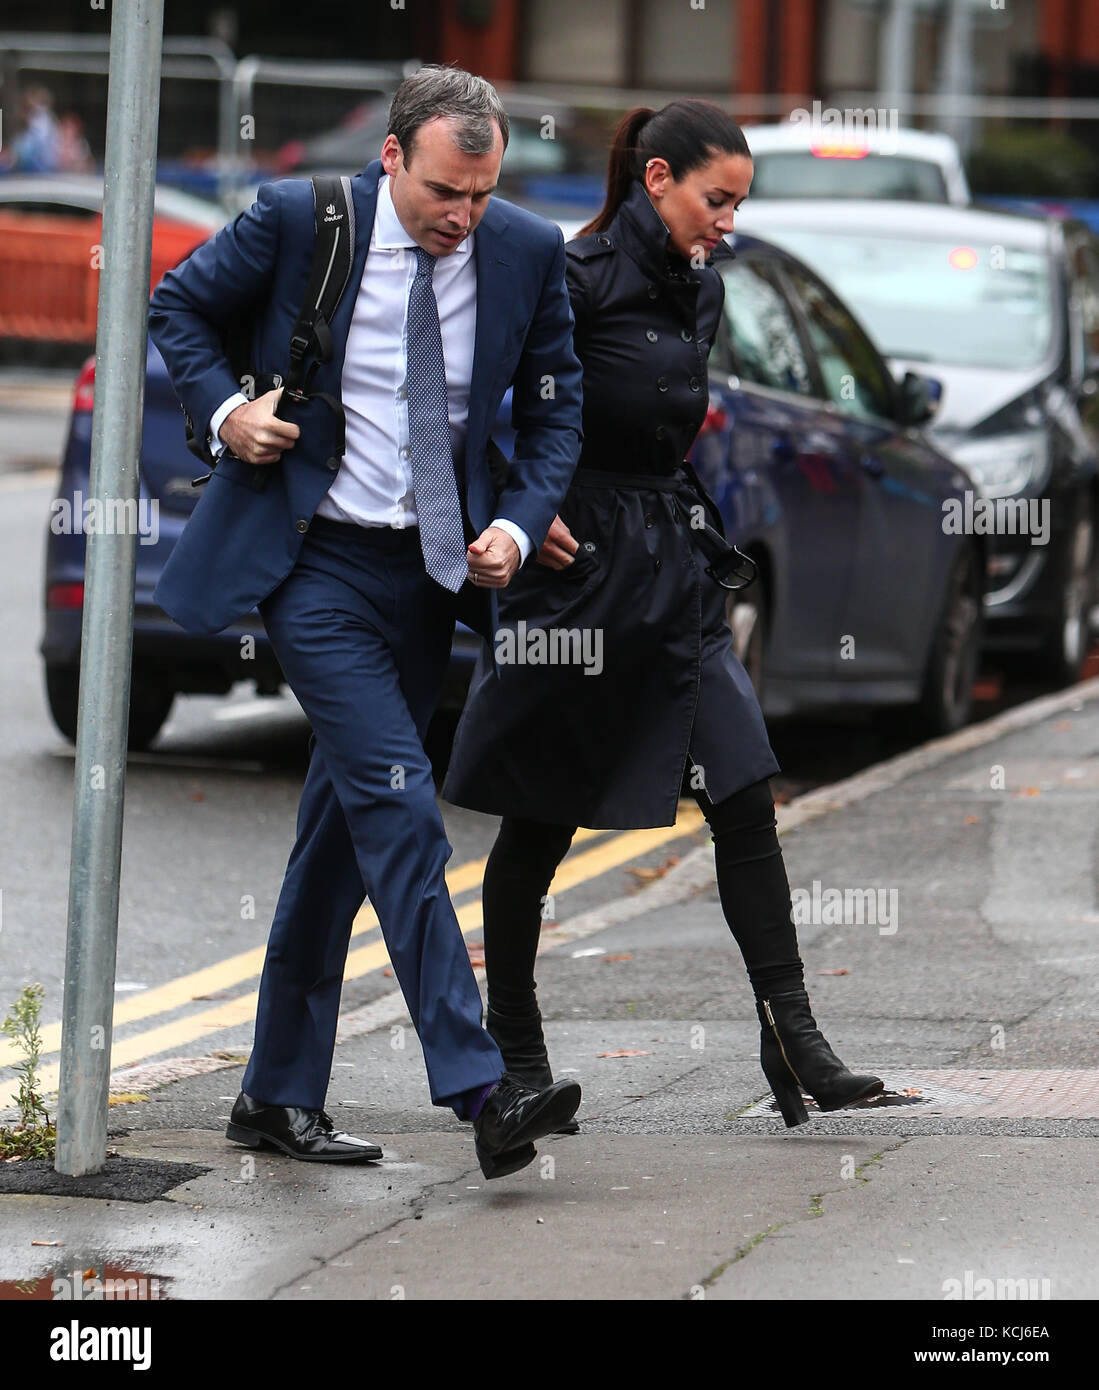 Kirsty Gallagher arrives at Slough Magistrates Court to answer a charge of drink driving  Featuring: Kirsty Gallacher Where: Slough, United Kingdom When: 04 Sep 2017 Credit: John Rainford/WENN.com Stock Photo